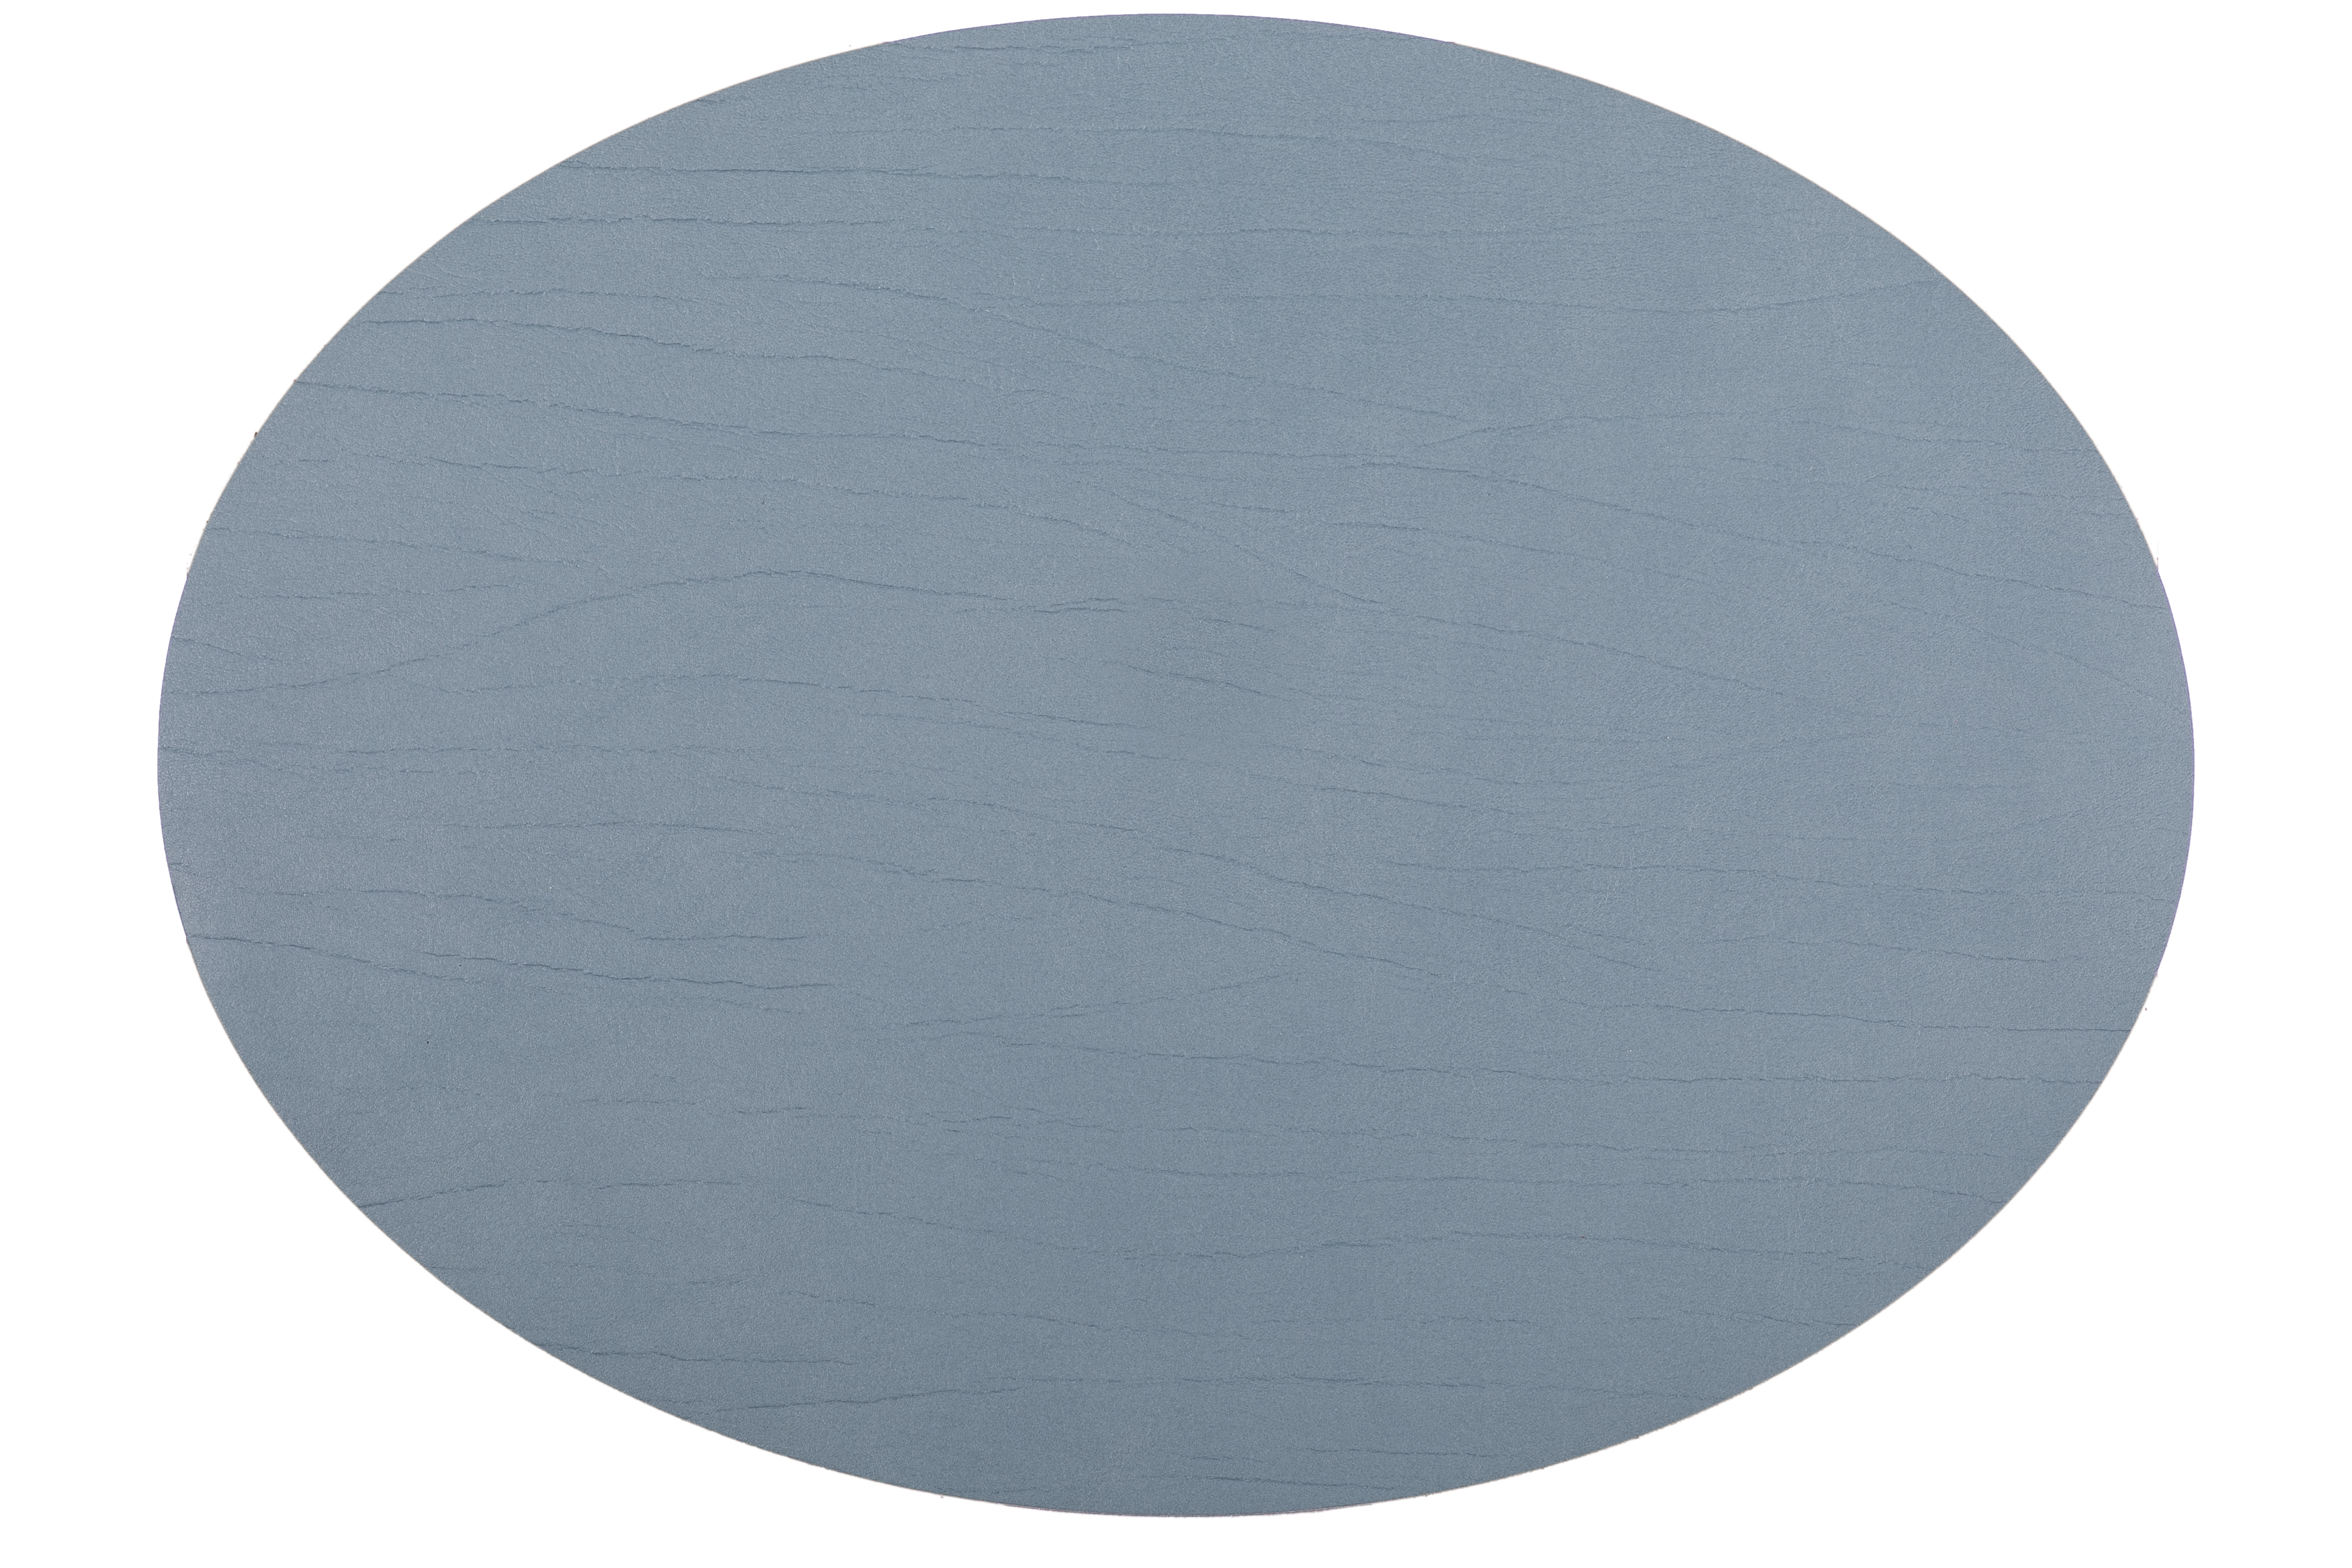 Titan placemat oval, 33x45cm, stone blue double sided